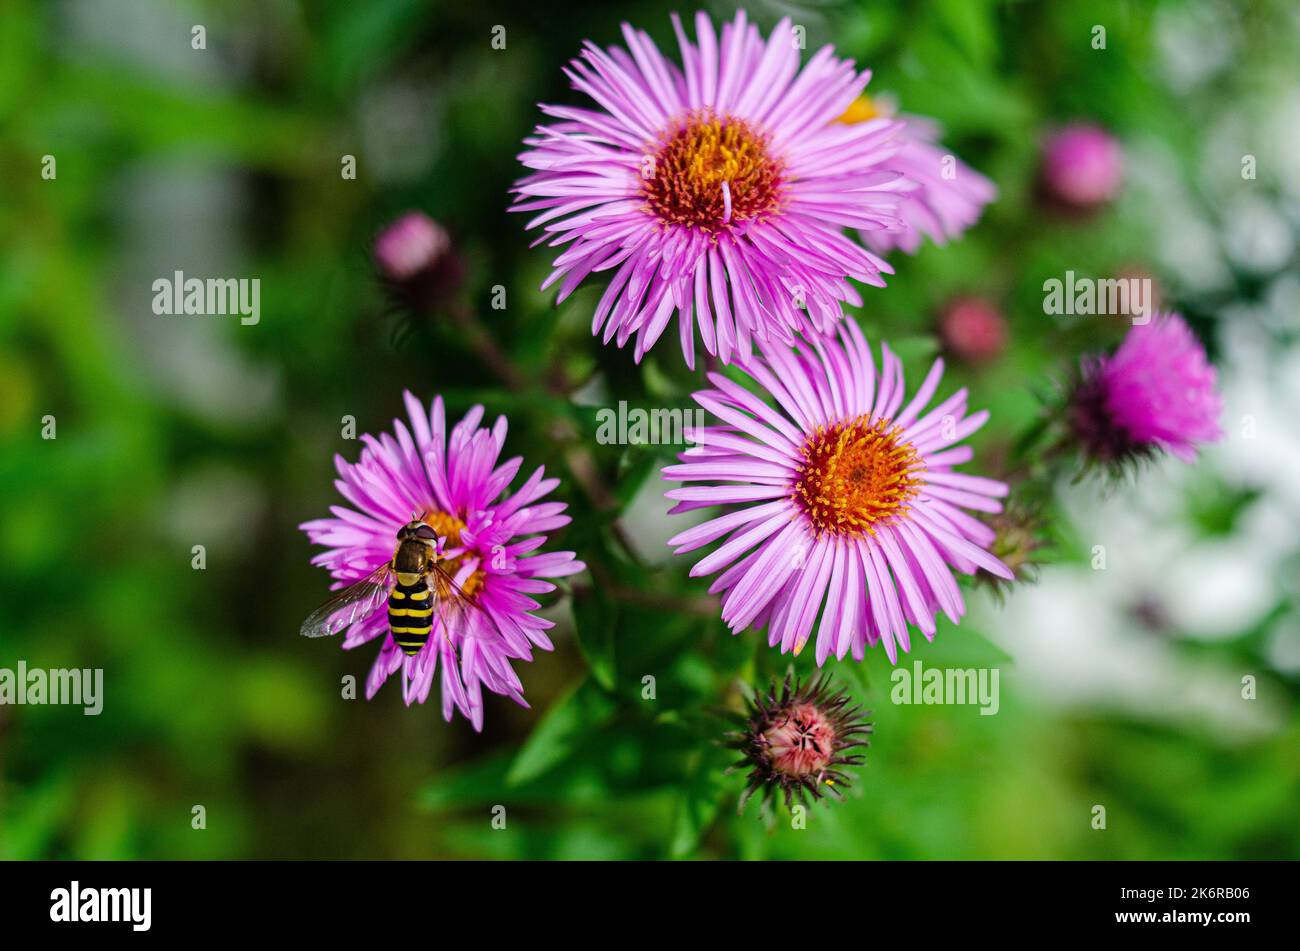 Autumn Aster flowers with water drops  Close-up on purple and yellow flowers. Dandelion from France, hight quality image Stock Photo